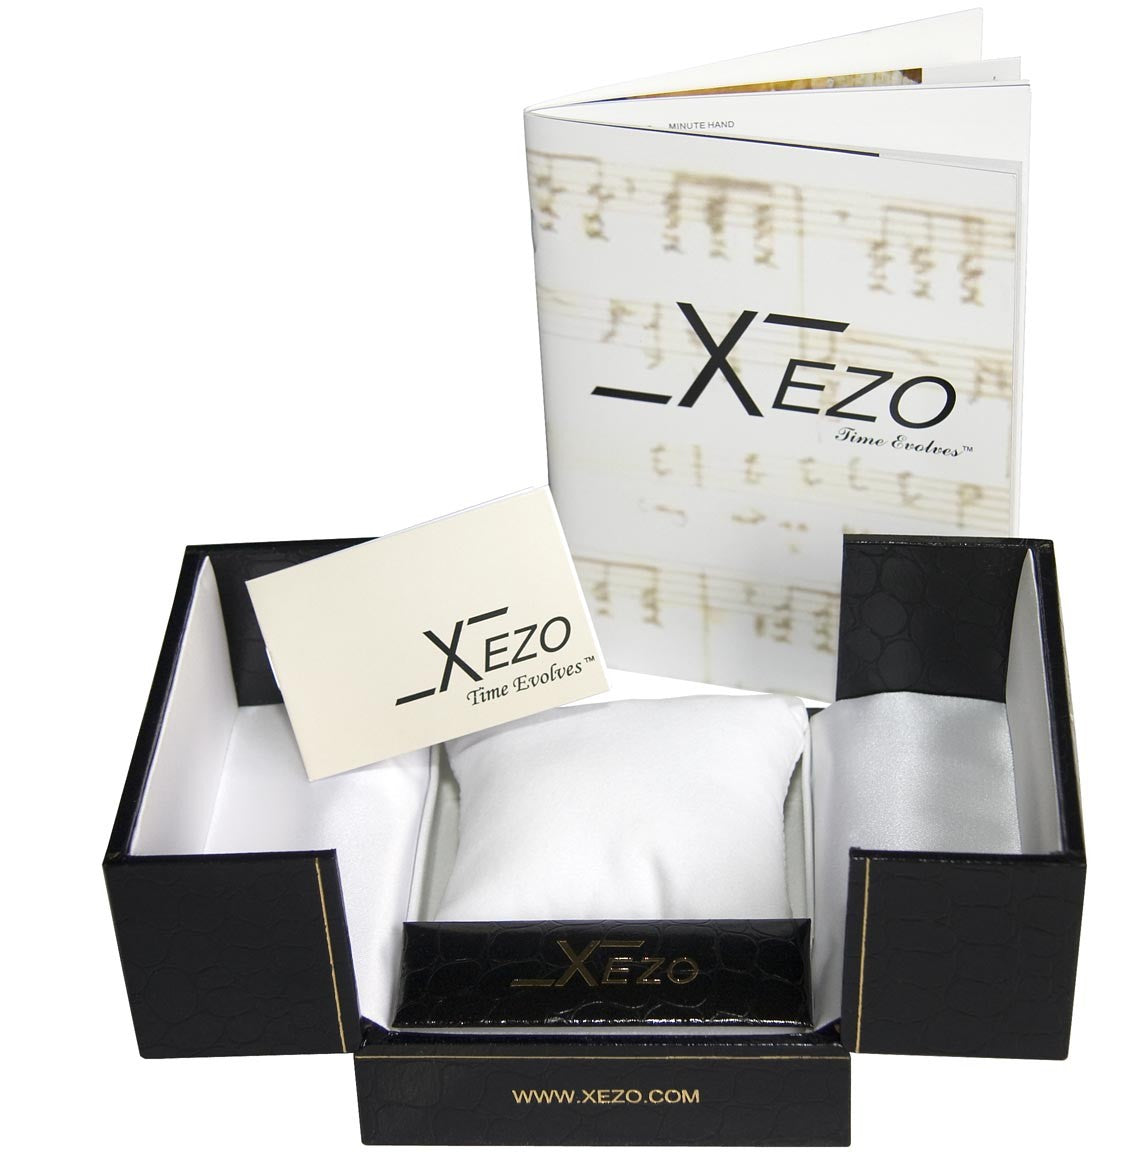 Xezo - Black gift box, certificate and manual of the Air Commando D44 S (Silver Guilloché) Leather watch. 